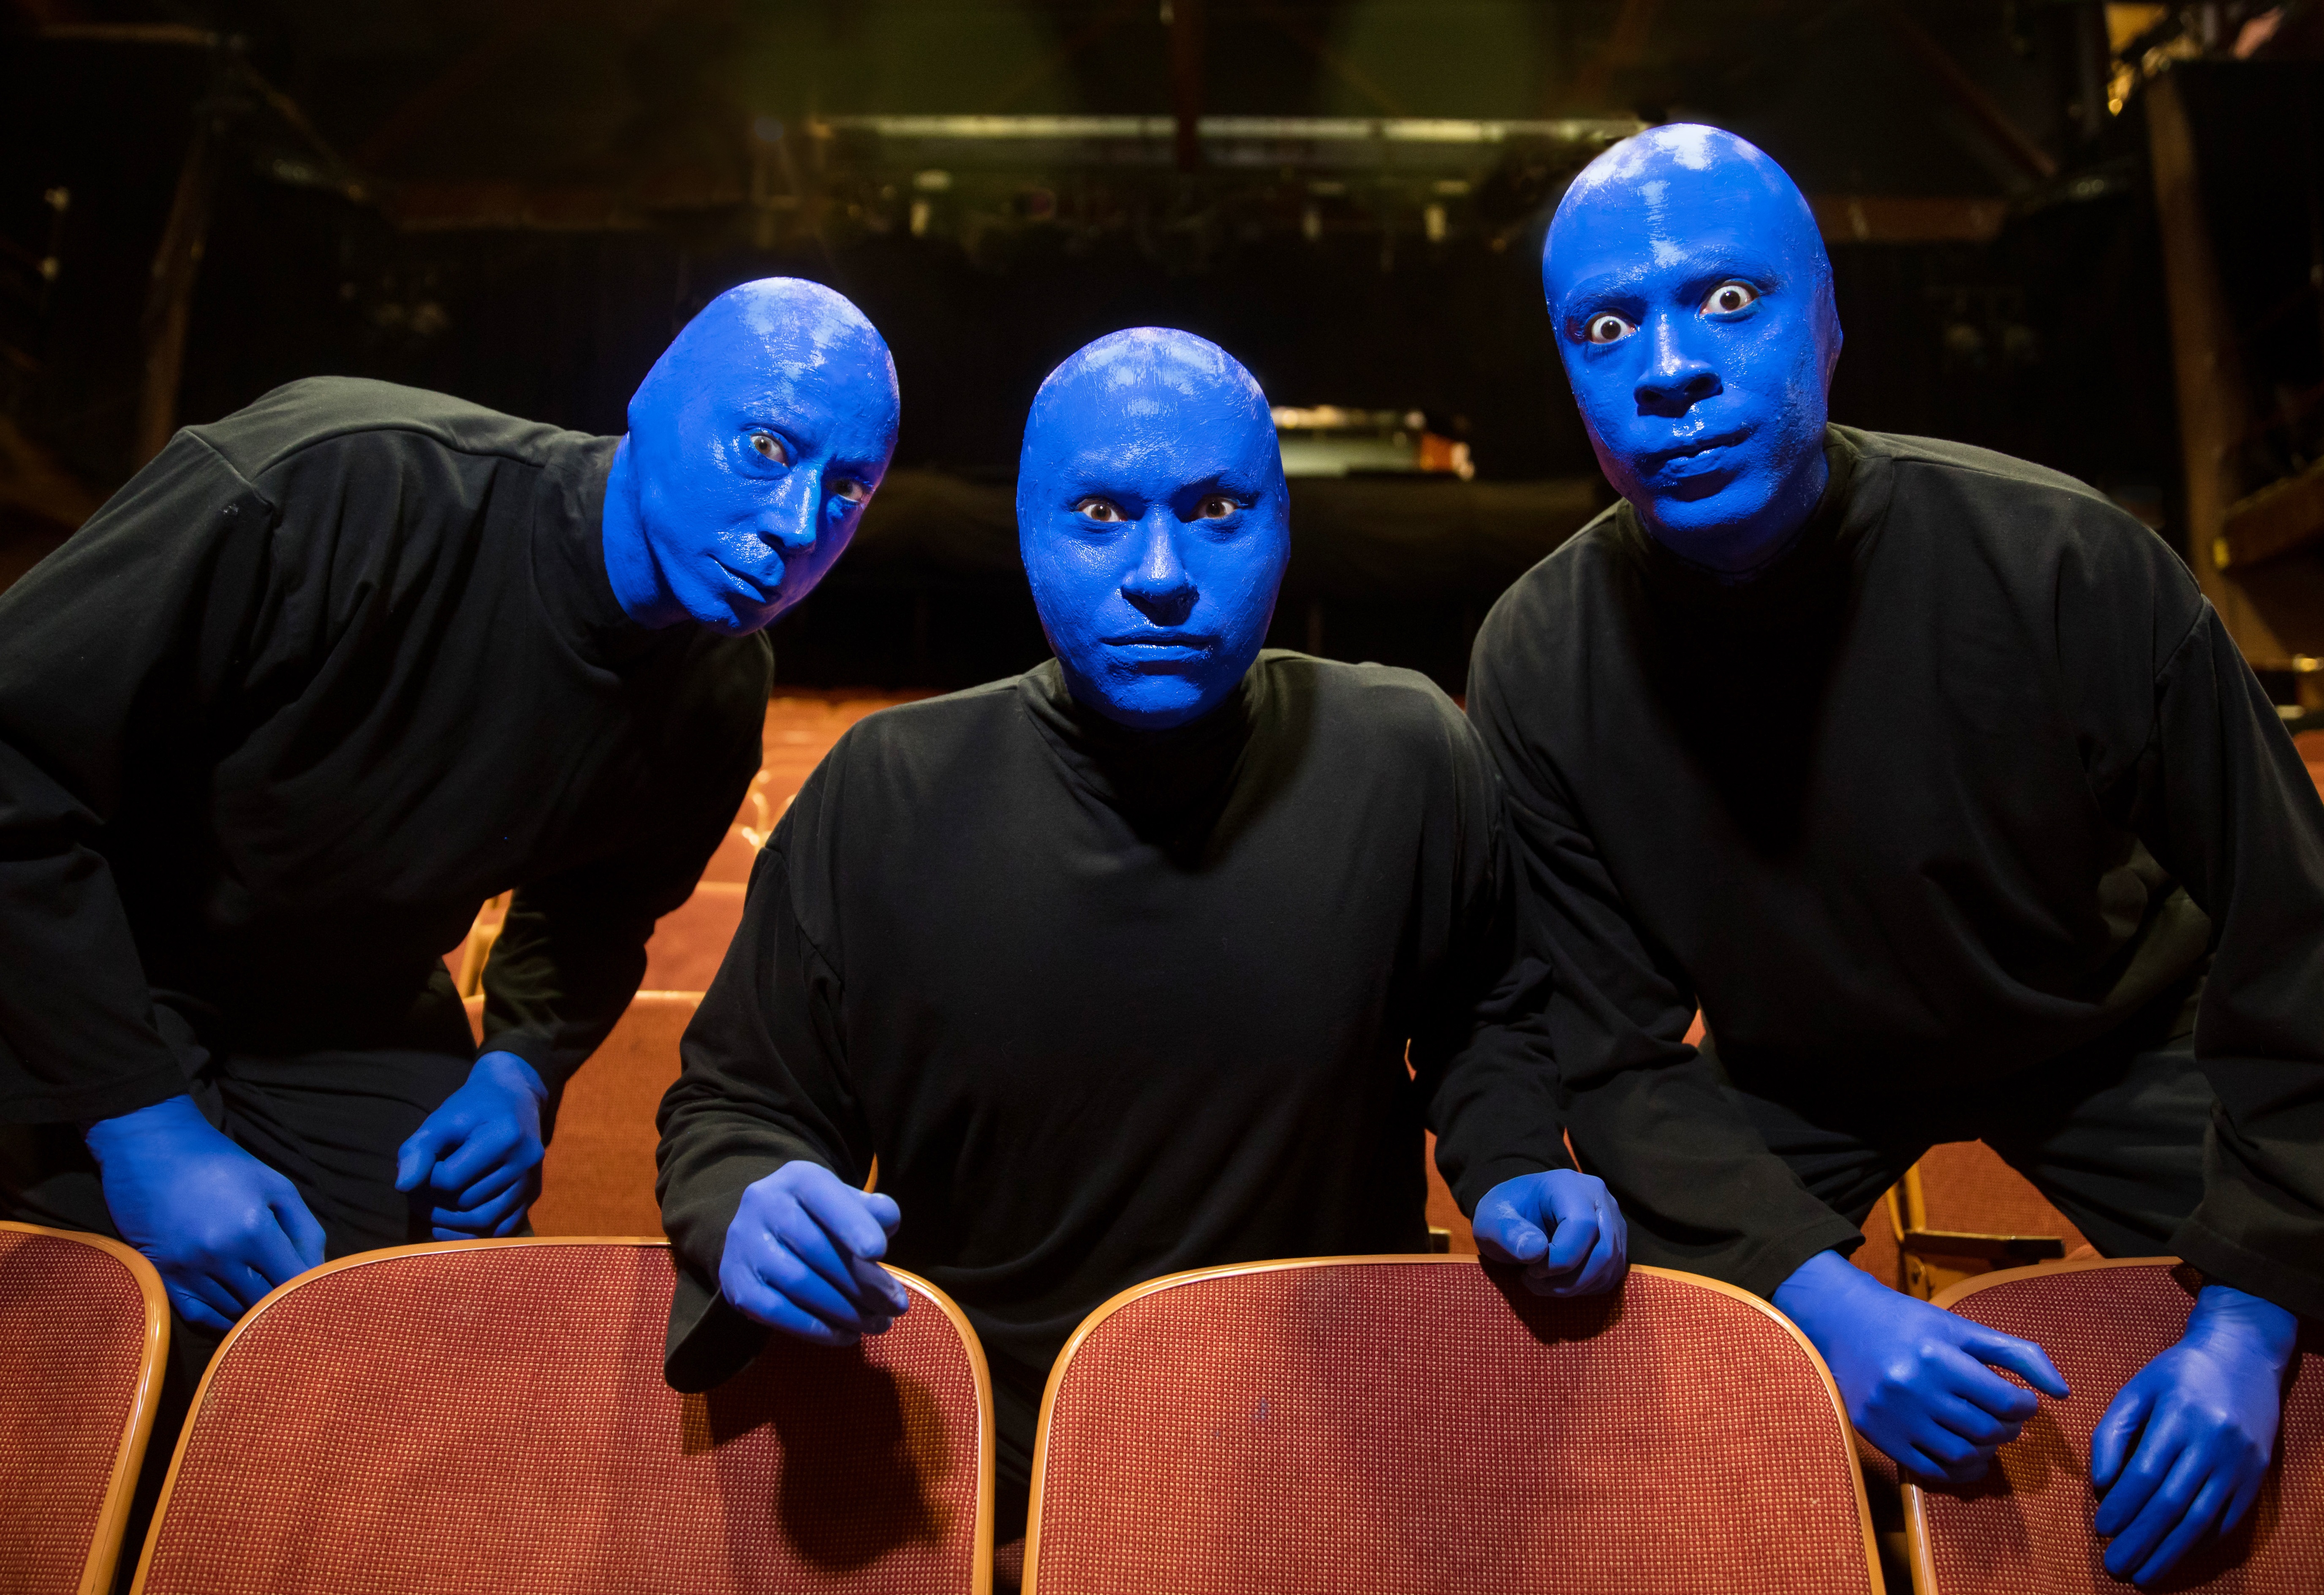 Here's what you can expect from the Blue Man Group as they bring their new show to Riverside